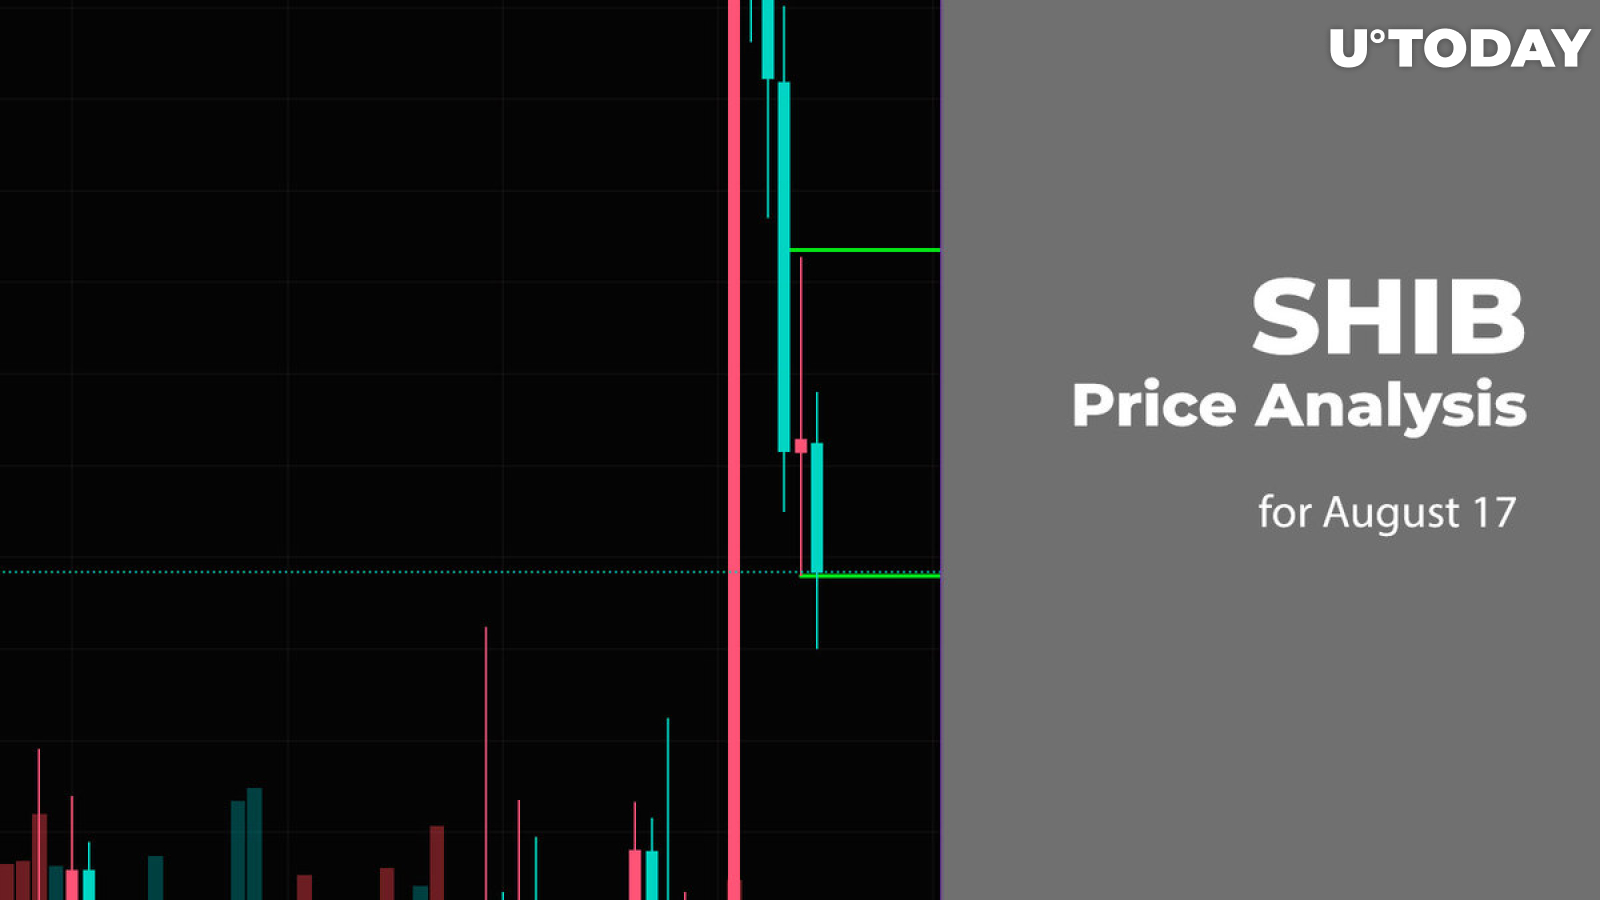 SHIB Price Analysis for August 17